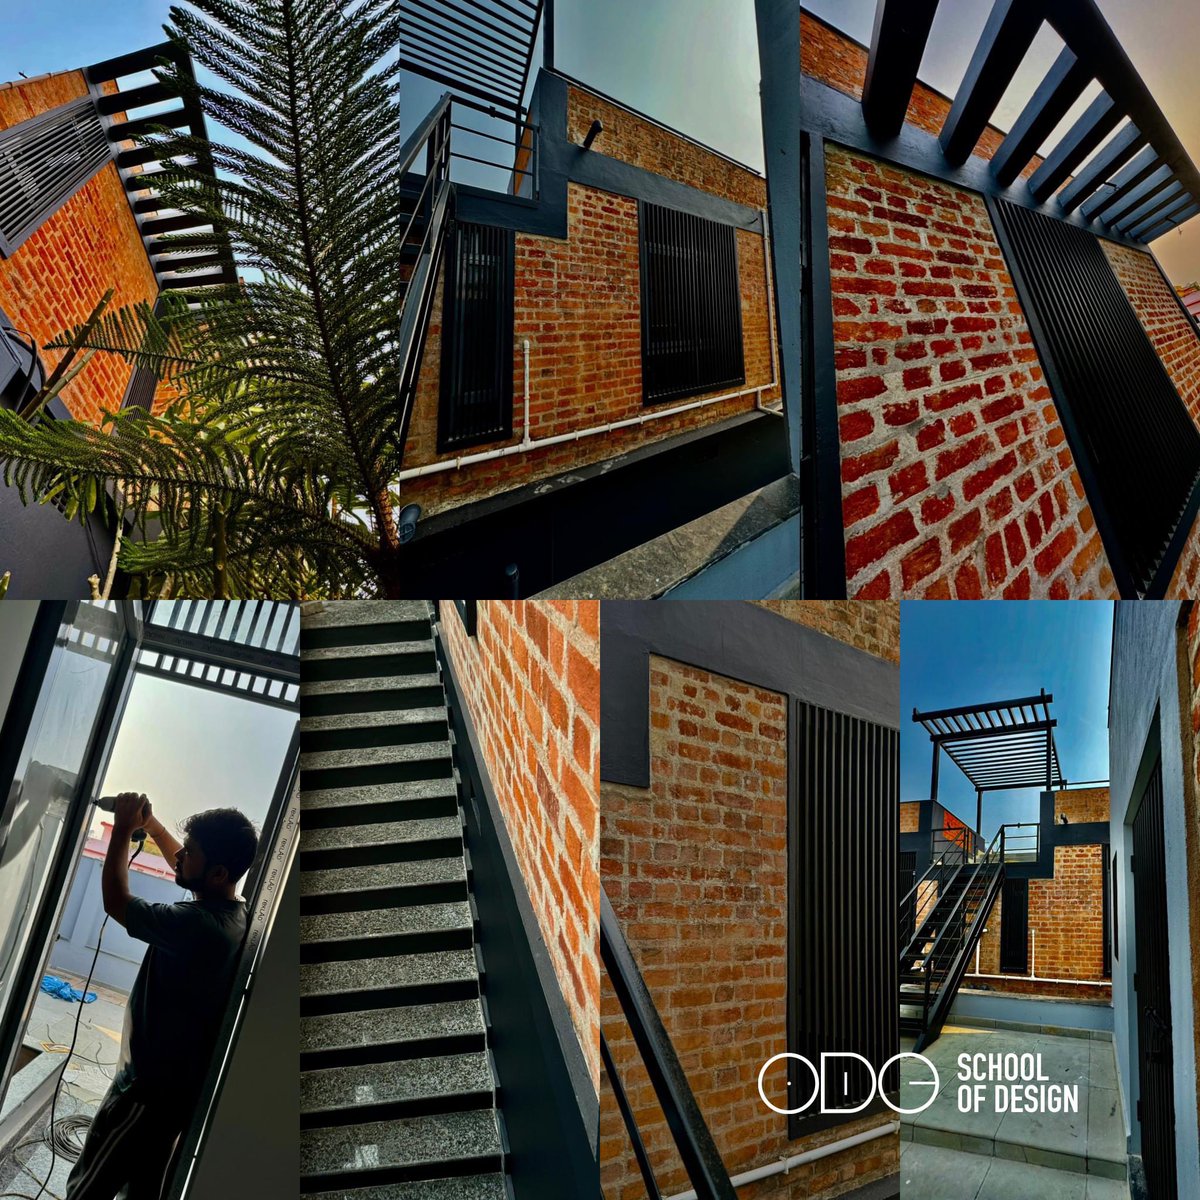 A sneak peek of the upcoming 'ODC School of Design' in #Bhubaneswar, #Odisha! thrilled to spearhead this architectural project, reflecting my academic passions as well. The grand opening is just around the corner, Stay tuned. #ODCSchoolofDesign #DesignCareer #Education